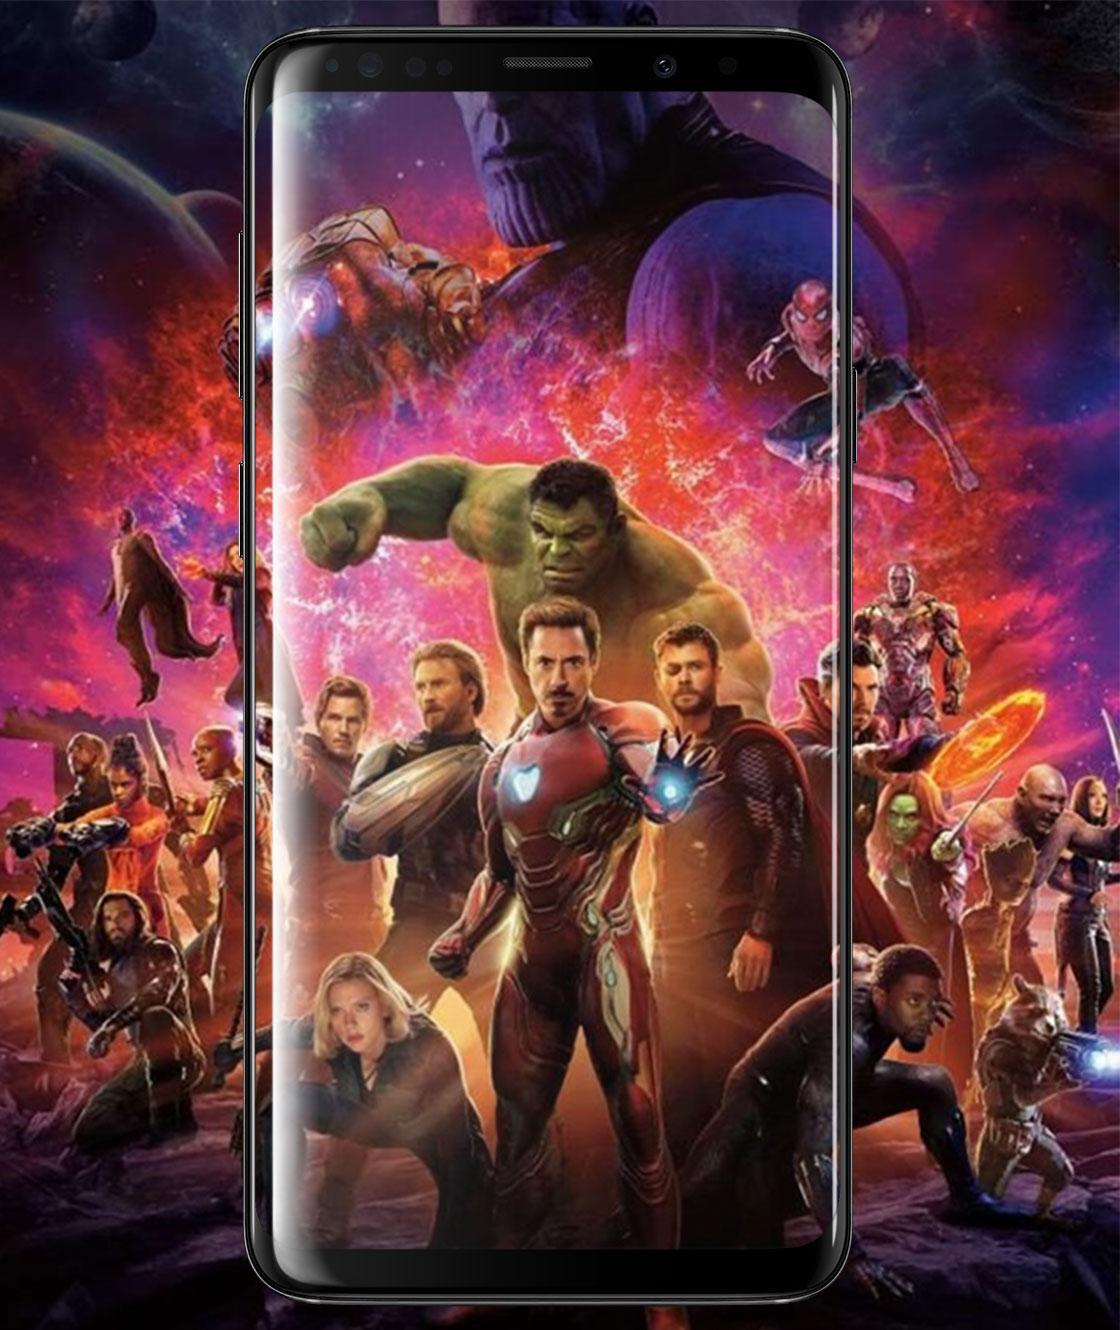 Avengers Infinity War Wallpaper Hd For Android Apk Download